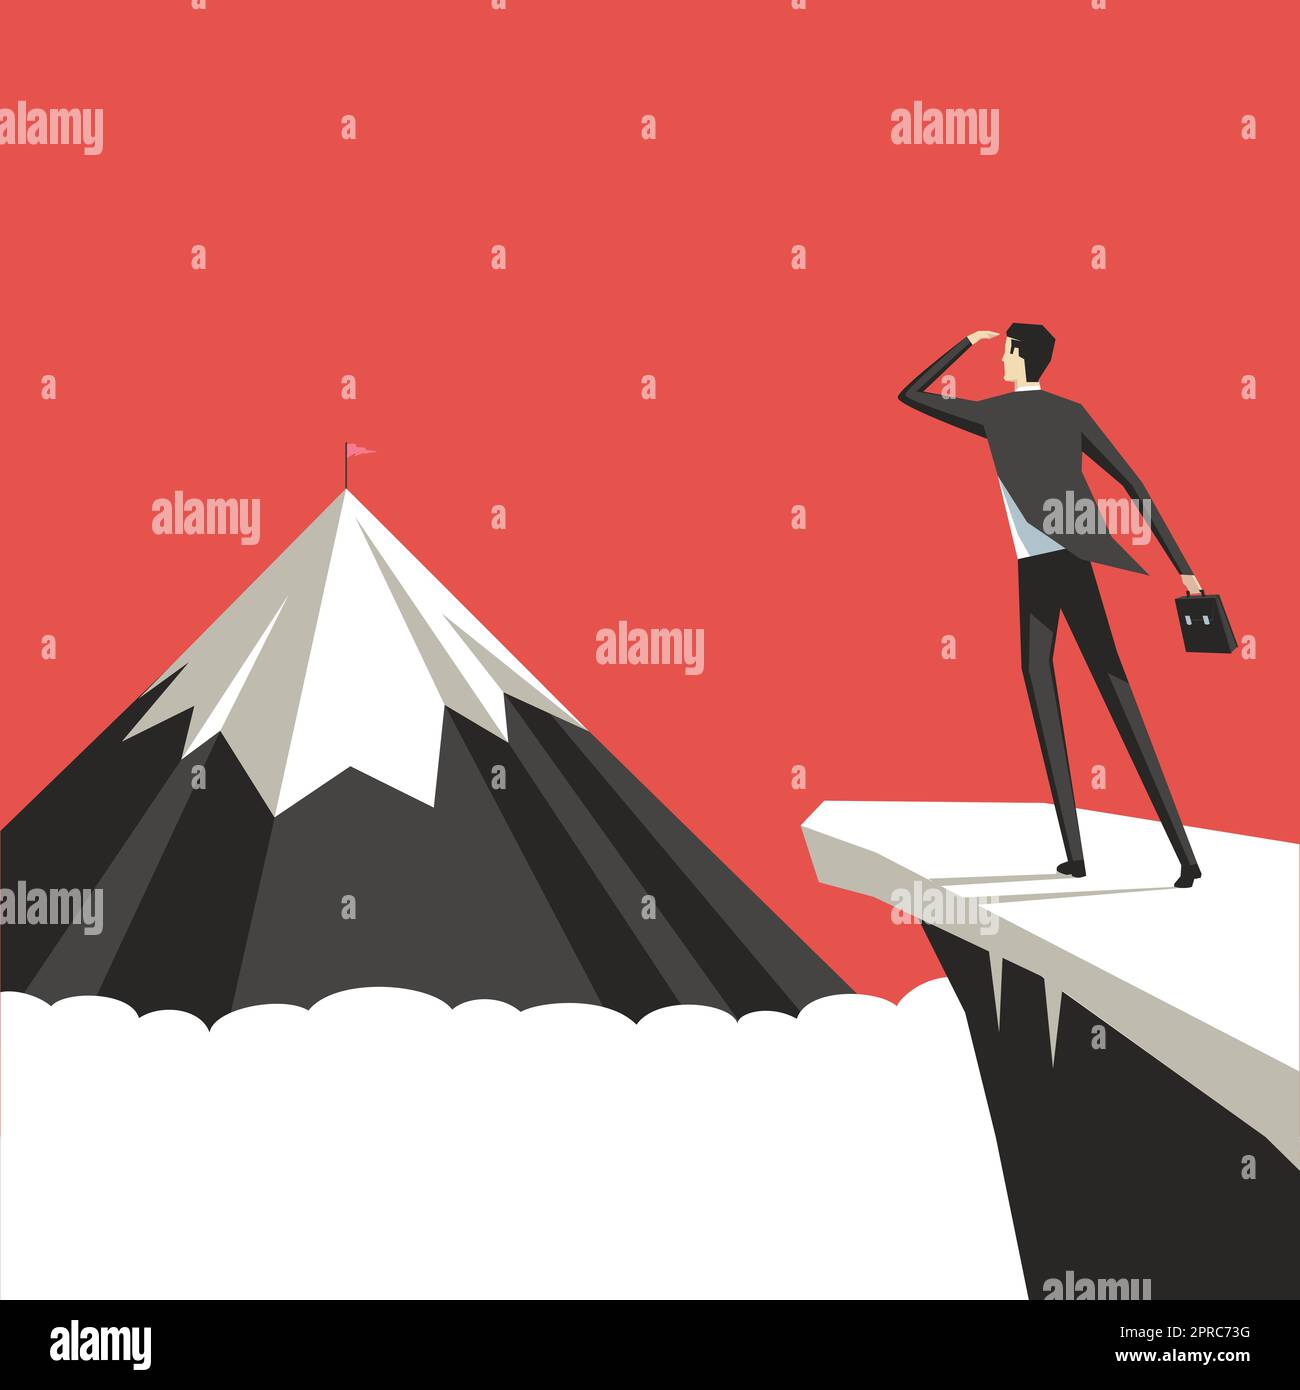 Man On A Mountain Drawing Proud Of His Climbing Success To The Clouds. Athlete On A Cliff Celebrating Achievement Ascending To The Top. Sports Guy Reaching The Sky. Stock Vector